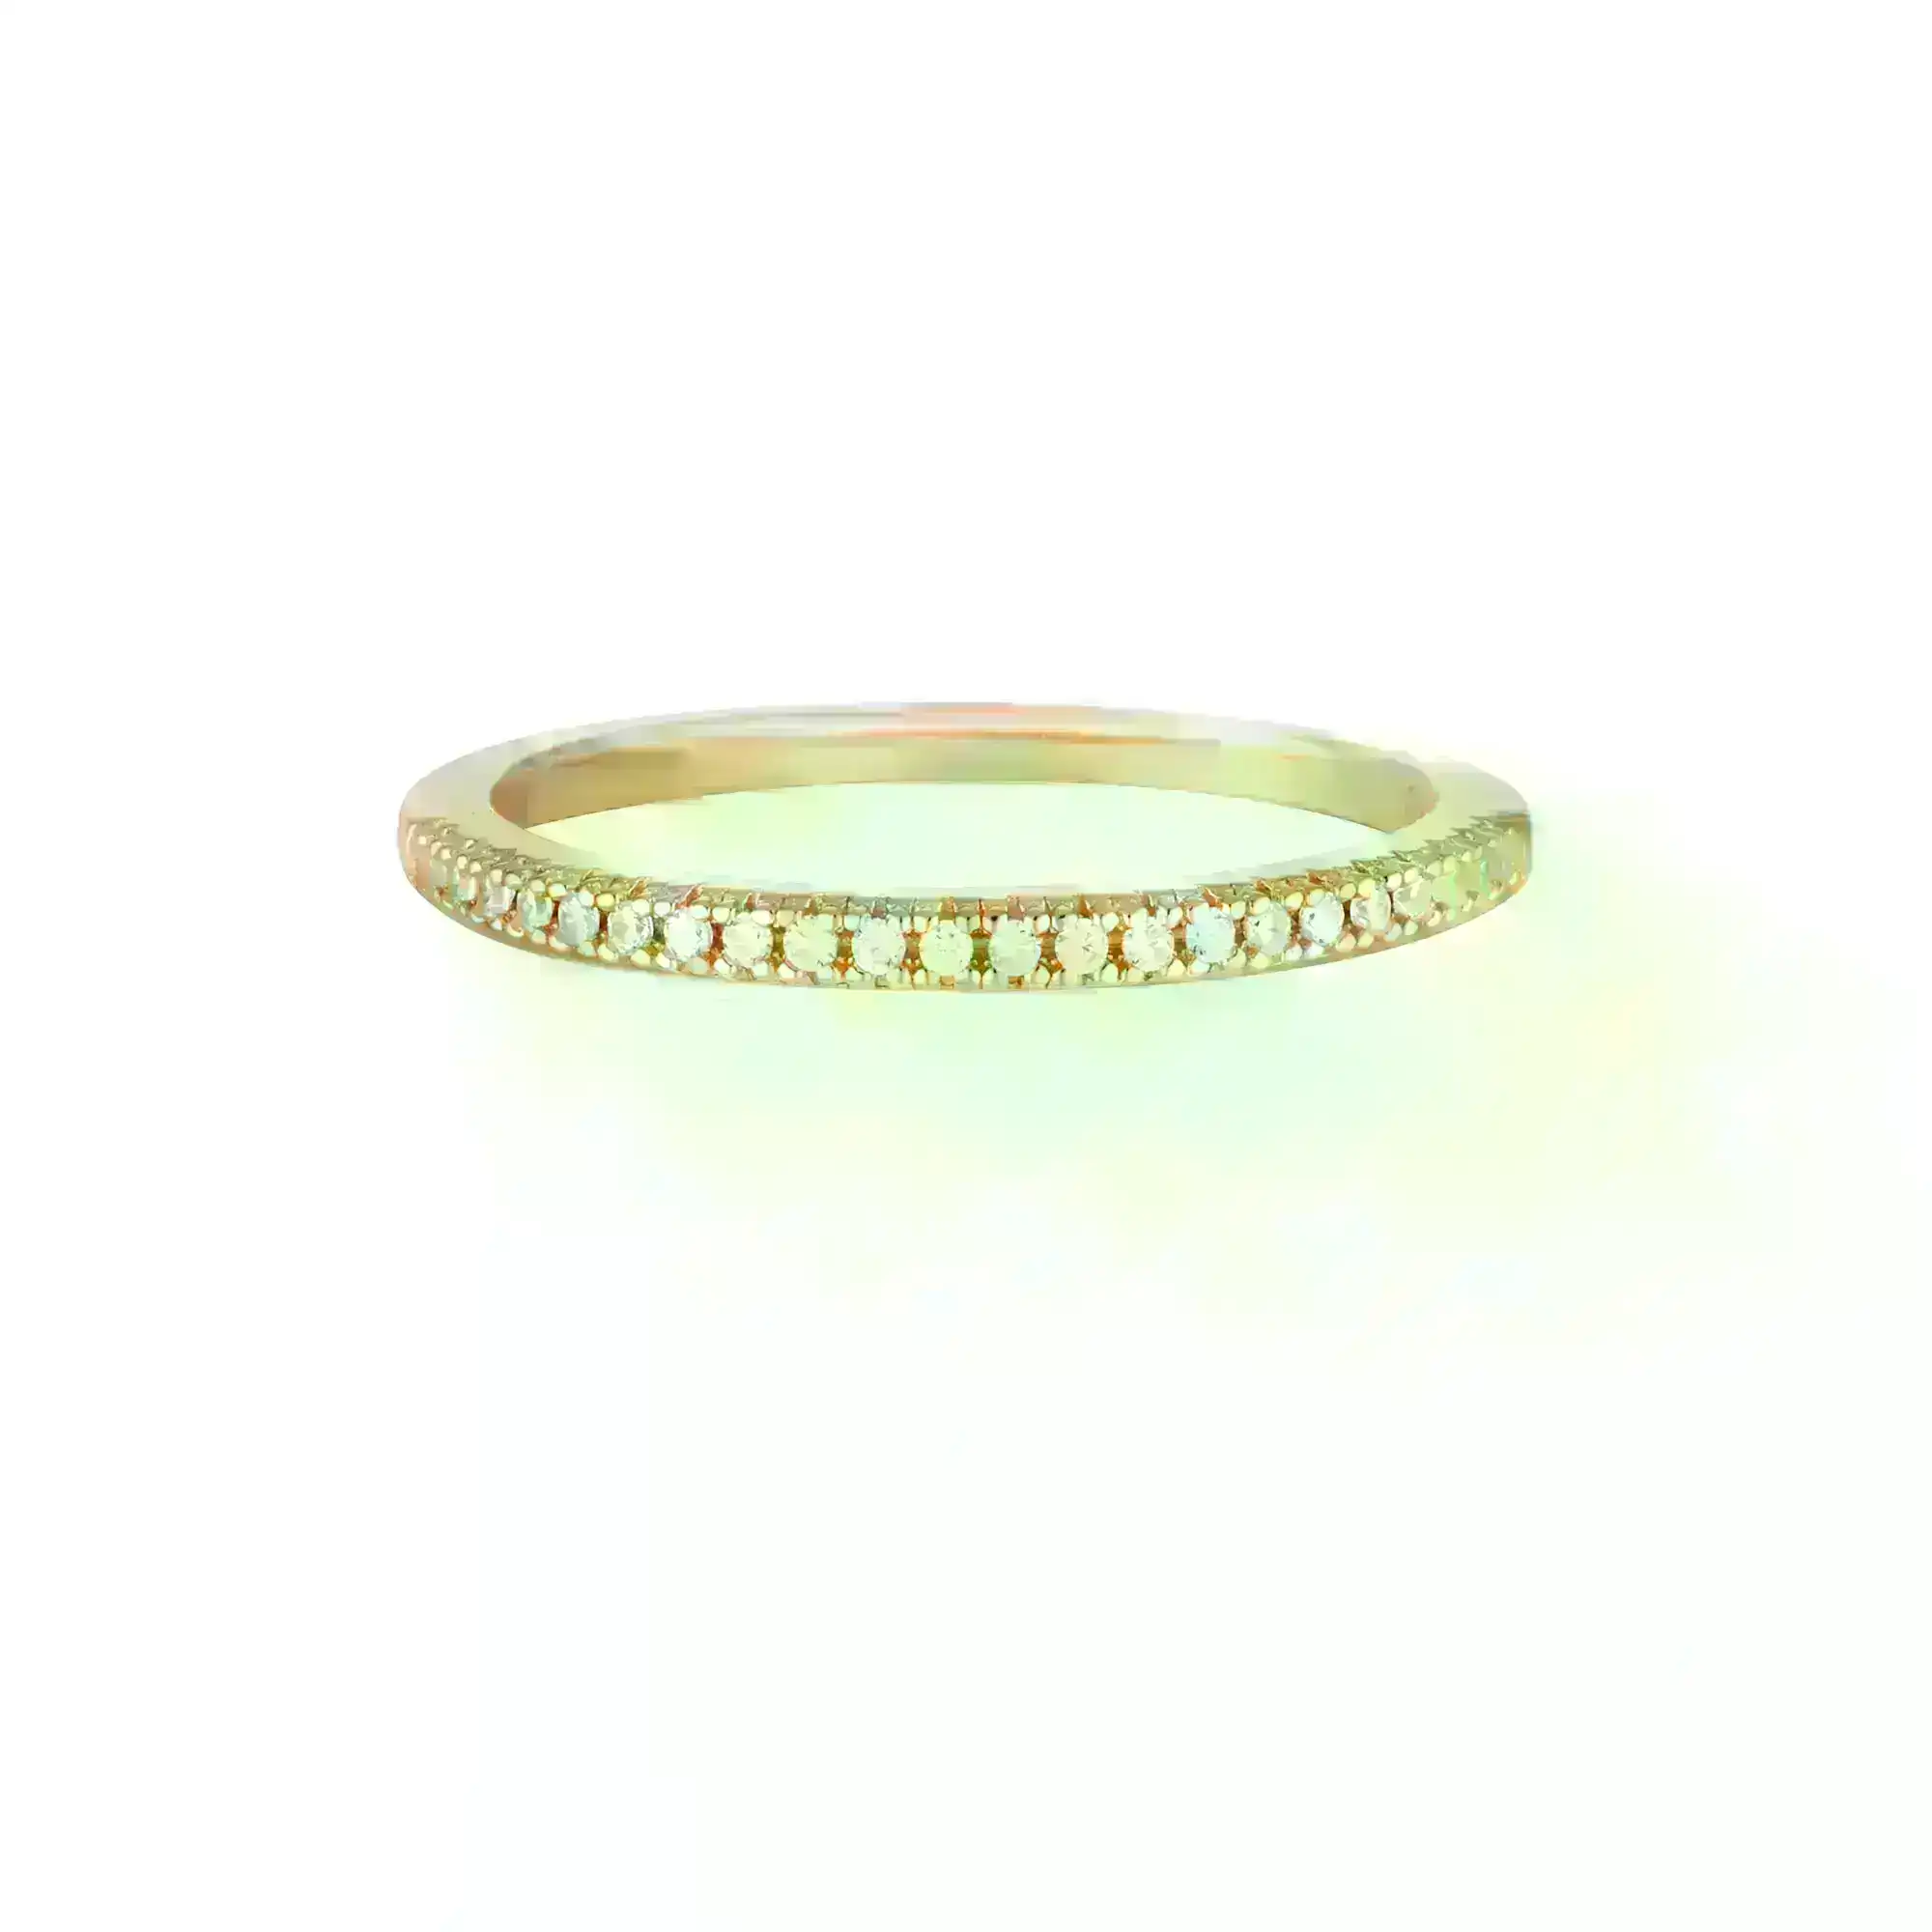 Georgini Iconic Bridal Rose Gold Plated Sterling Silver Anne Band Ring